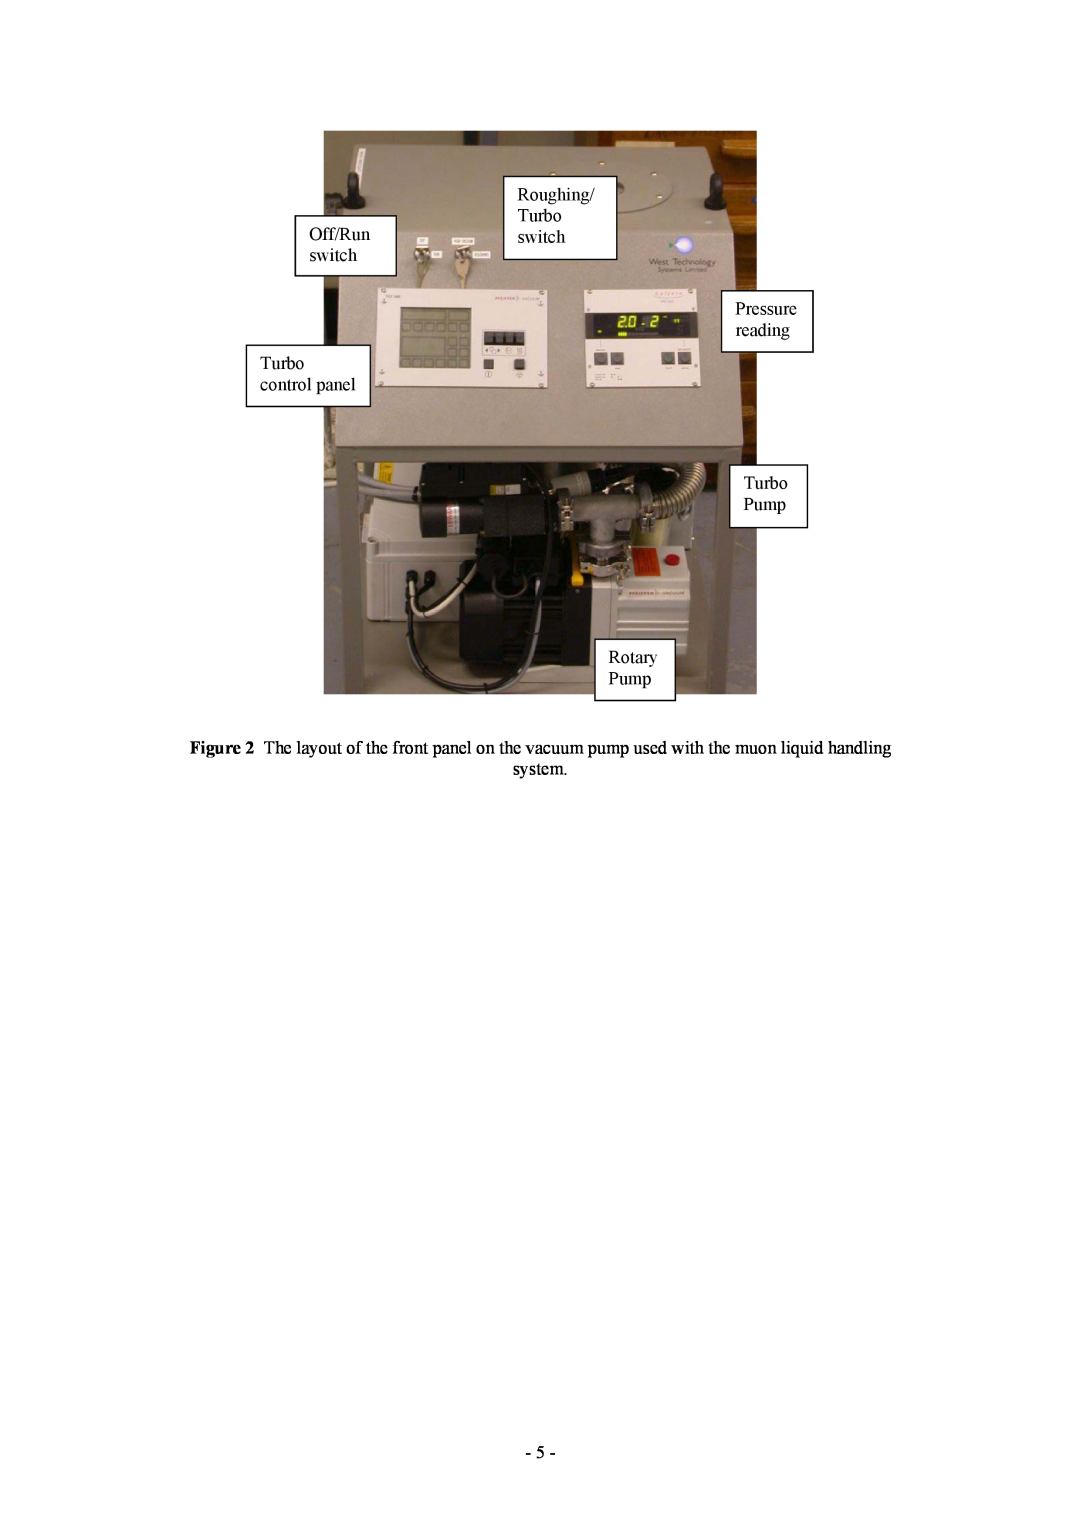 Boca Research None Off/Run switch Turbo control panel, Roughing/ Turbo switch Pressure reading Turbo, Pump Rotary Pump 